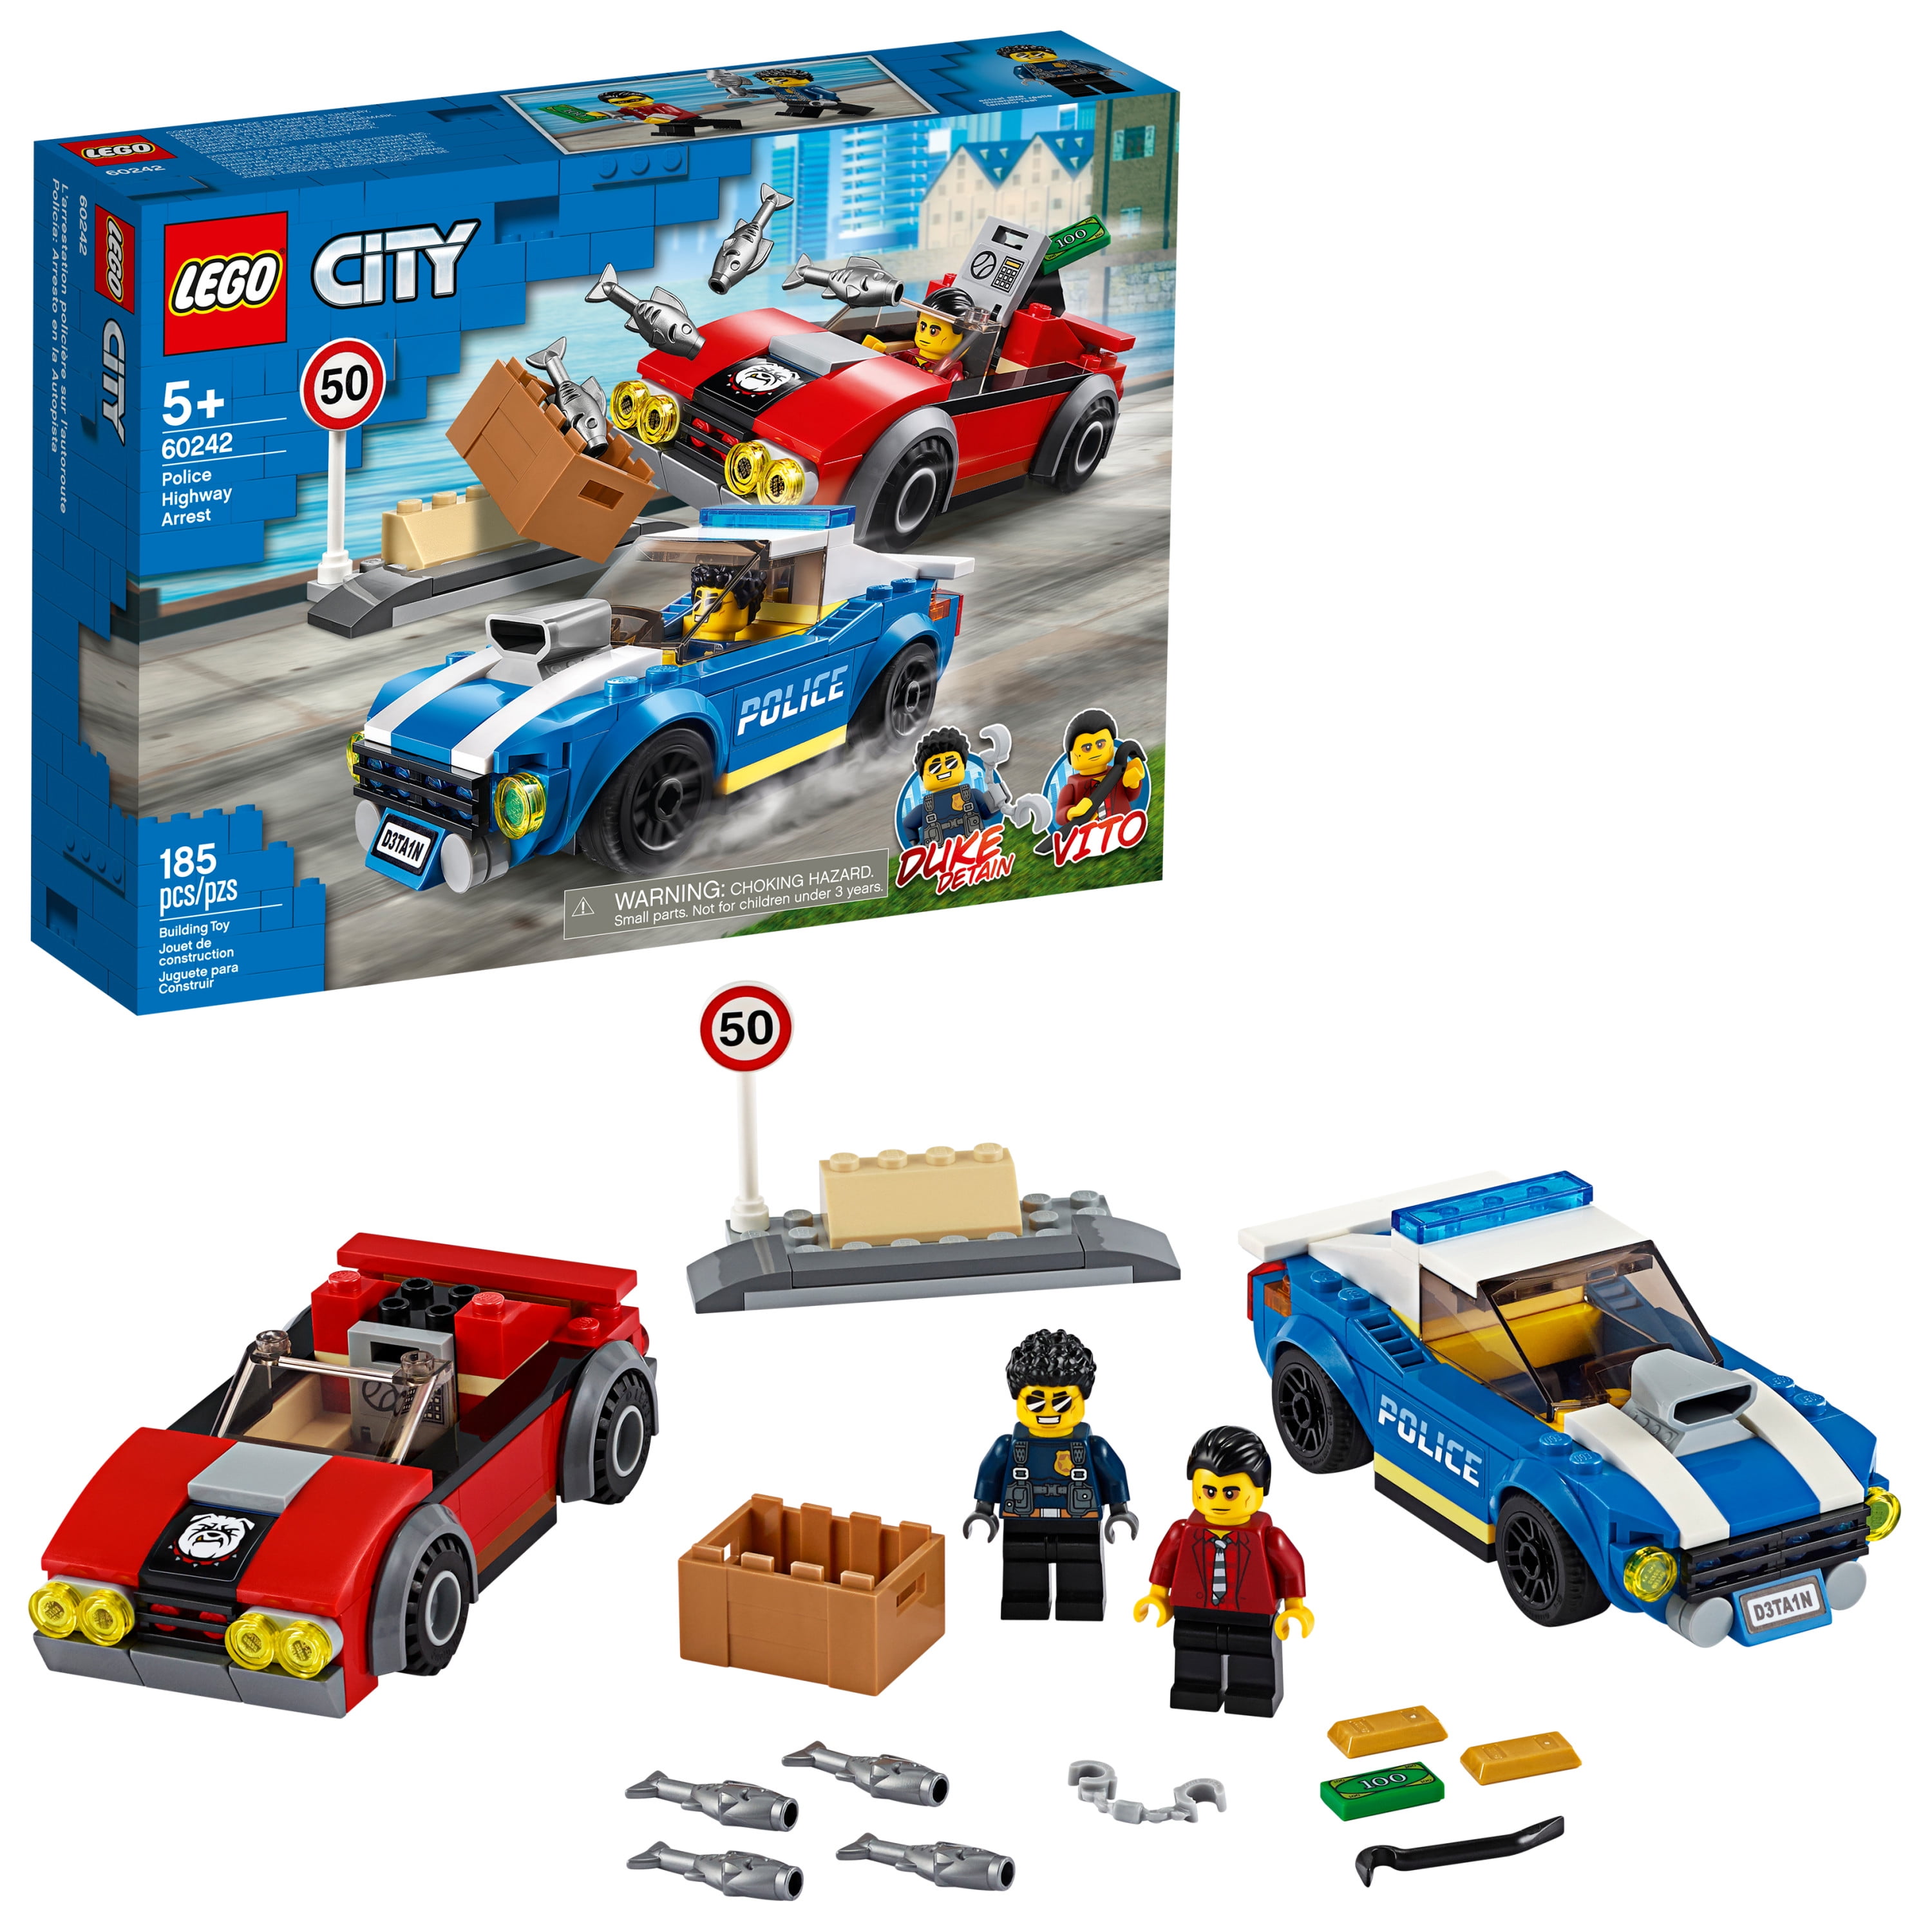 Details about   LEGO City Police SWAT Hummer Tank Slant Back Gray Truck SUV Speed Champions 